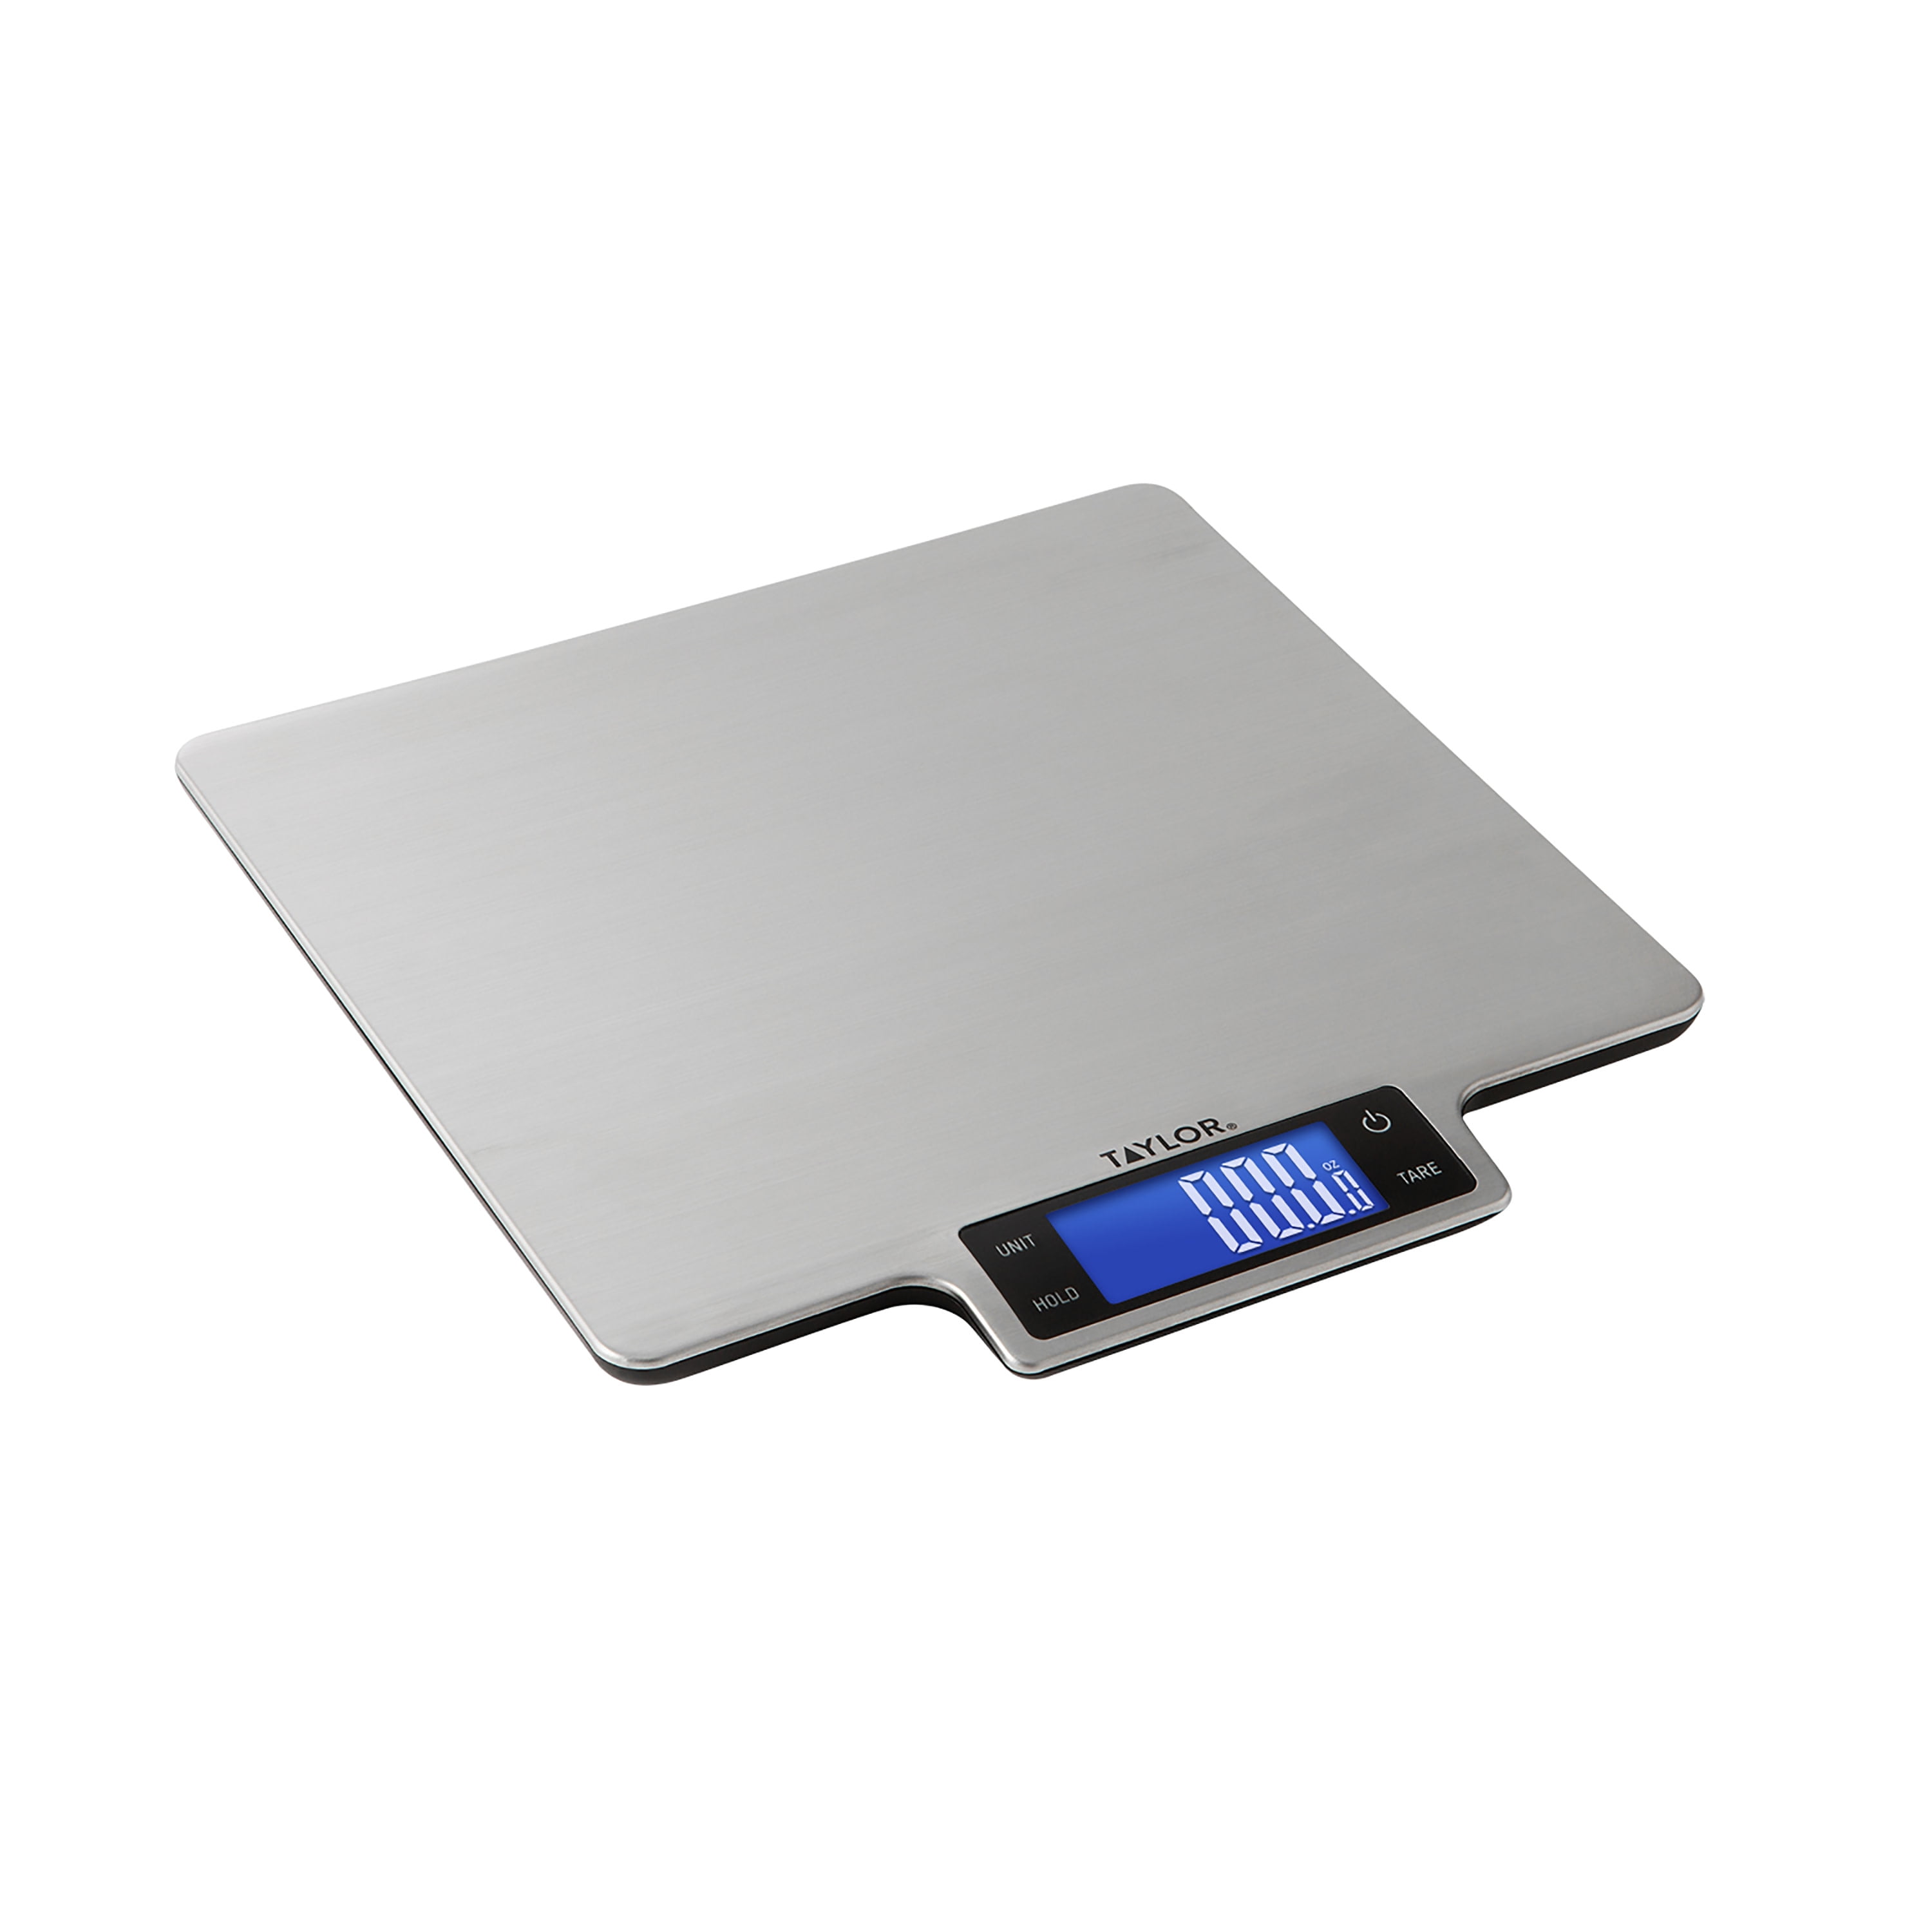 Taylor Stainless Steel Digital Kitchen Scale - Shop Utensils & Gadgets at  H-E-B